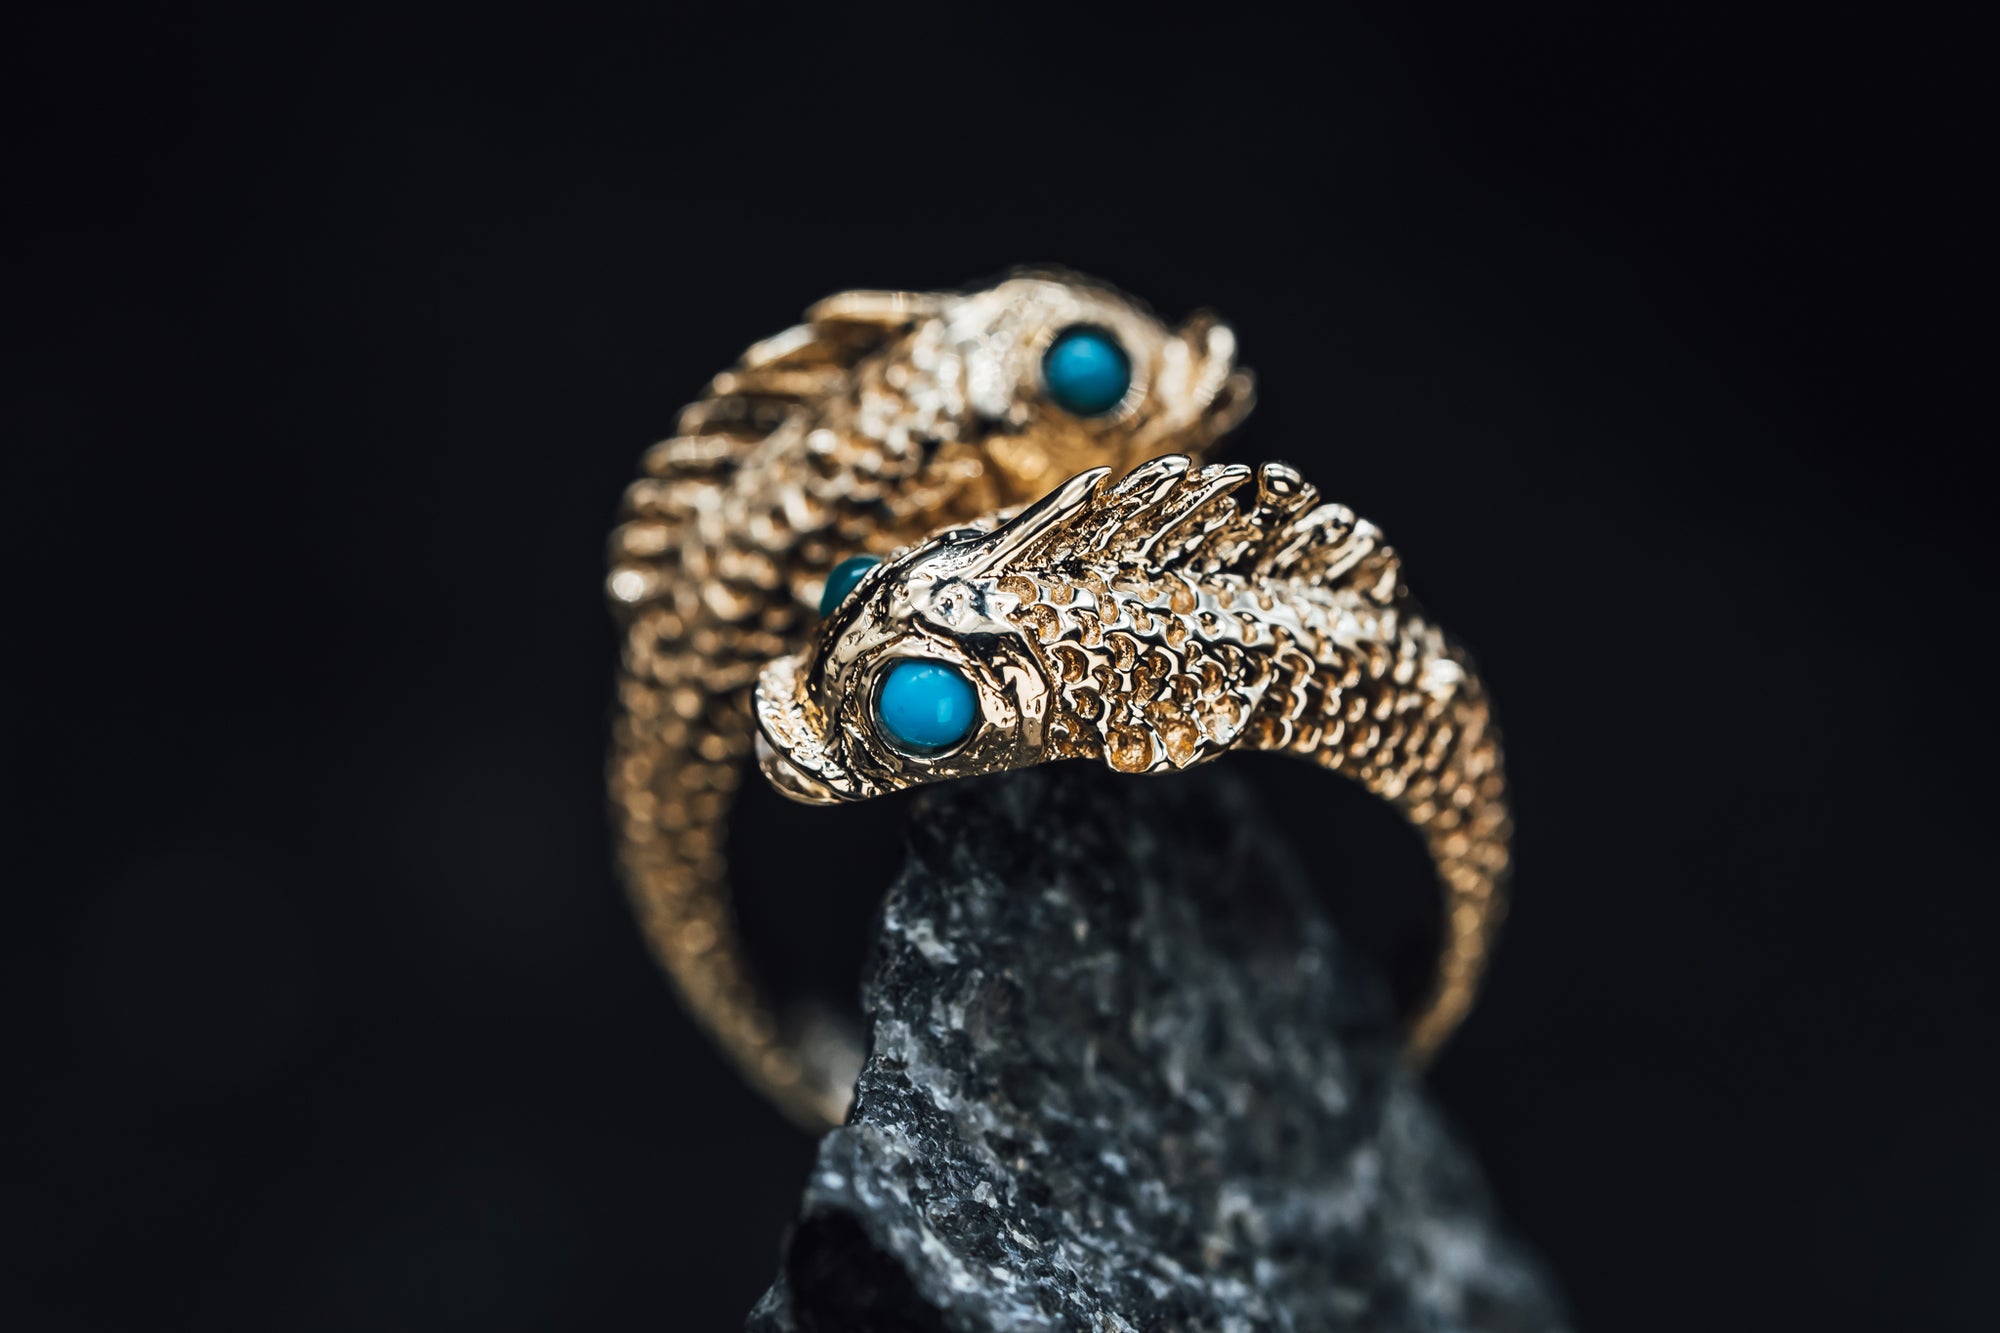 14k Yellow Gold Fish Ring with Turquoise Eyes